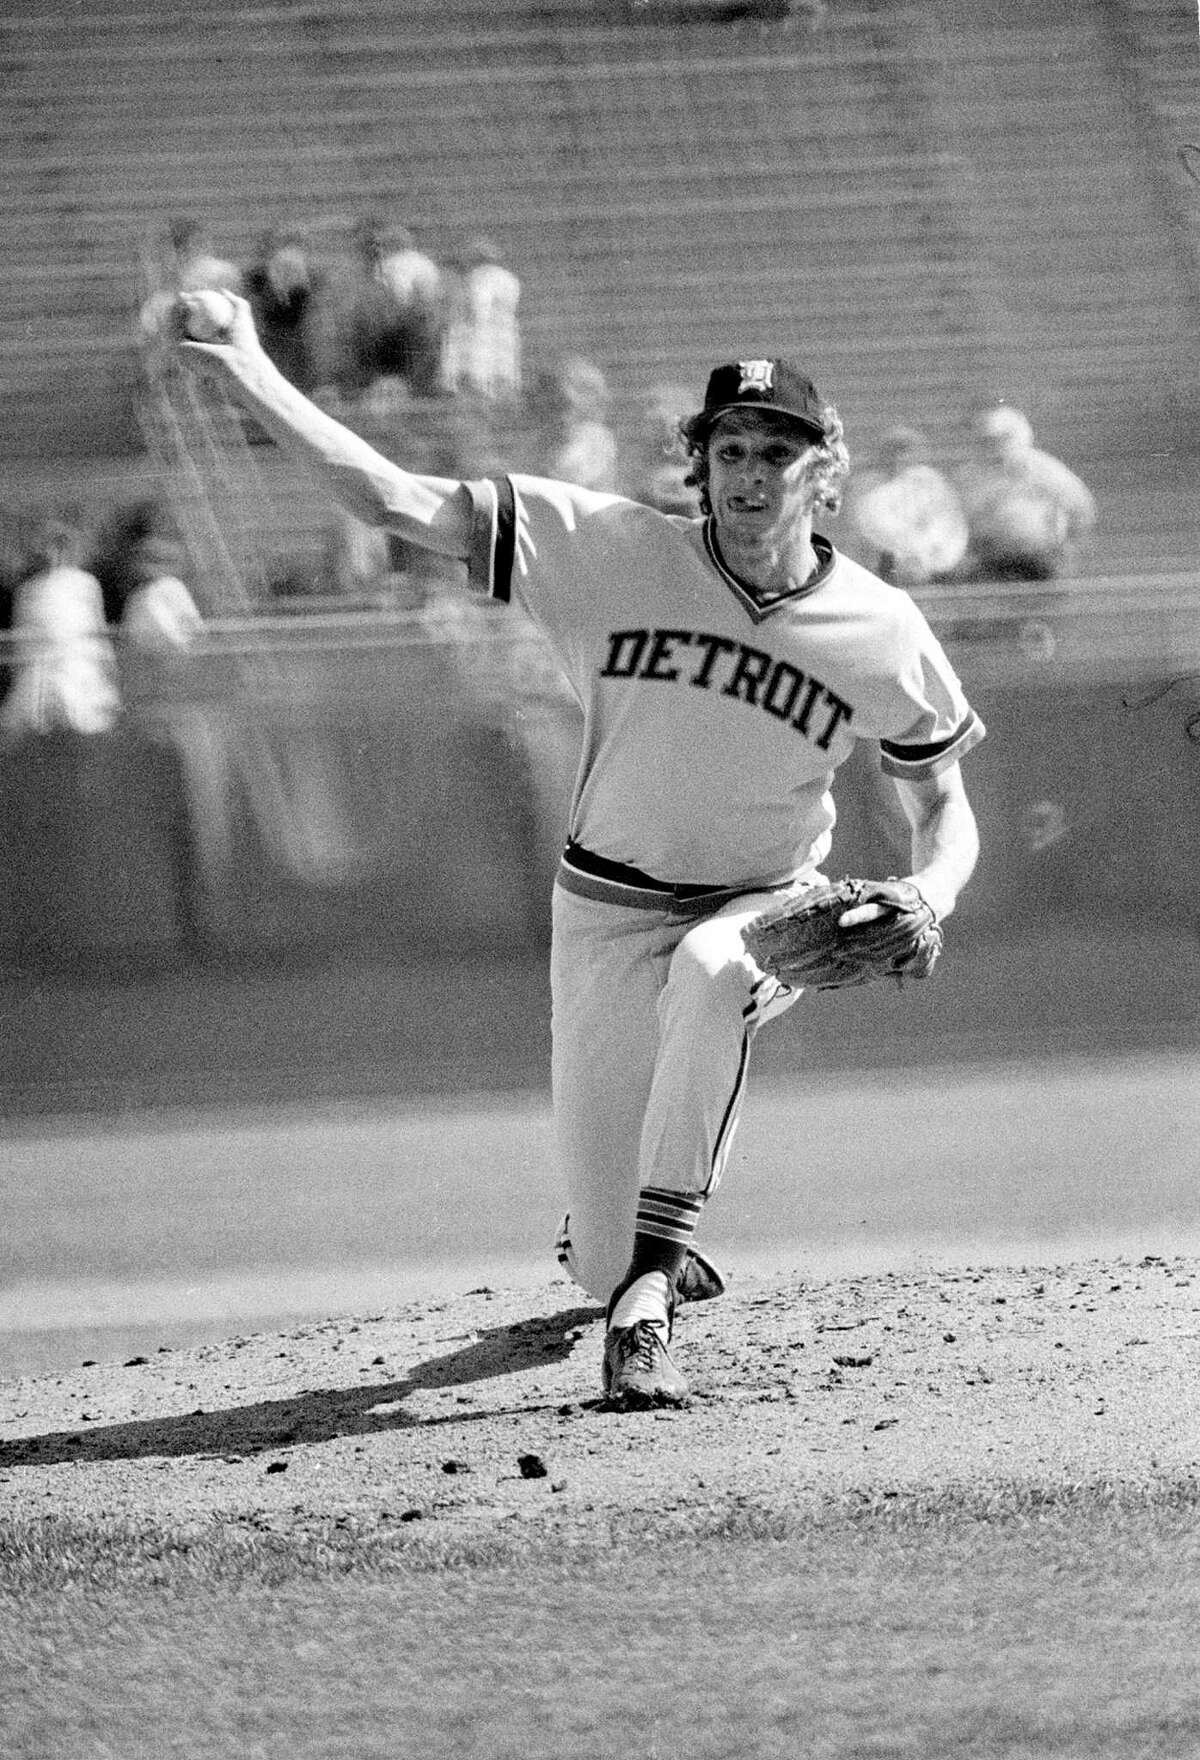 Lovably loony pitcher Mark Fidrych was simply dazzling in 1976, his rookie year. But an arm injury stole away the game he loved.